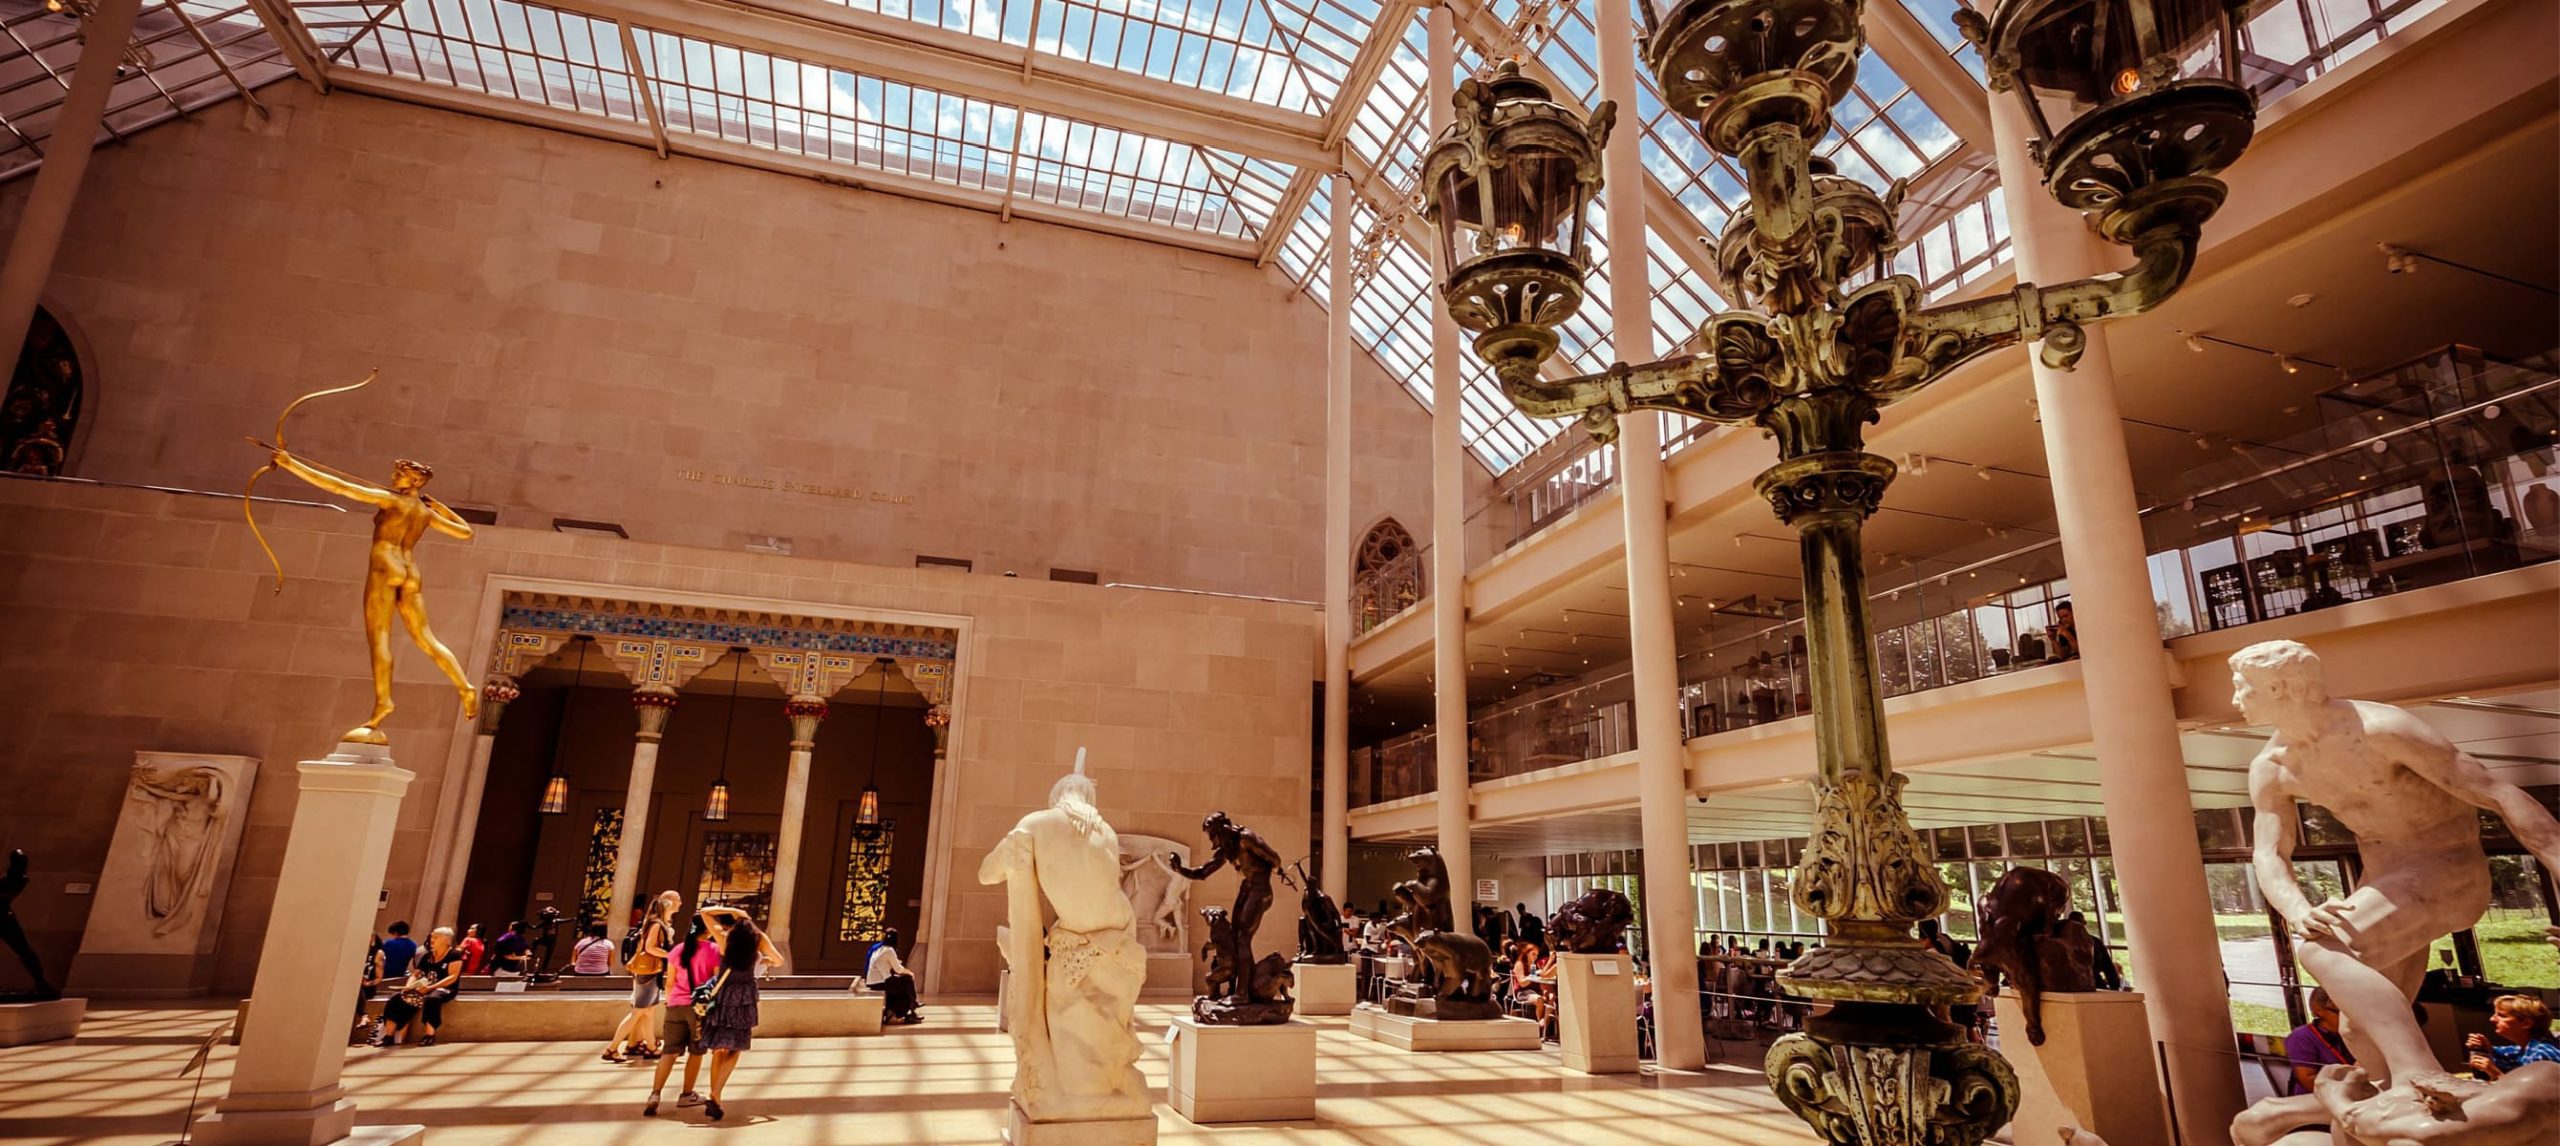 10 Amazing New York Museums To Visit On Your Next Trip